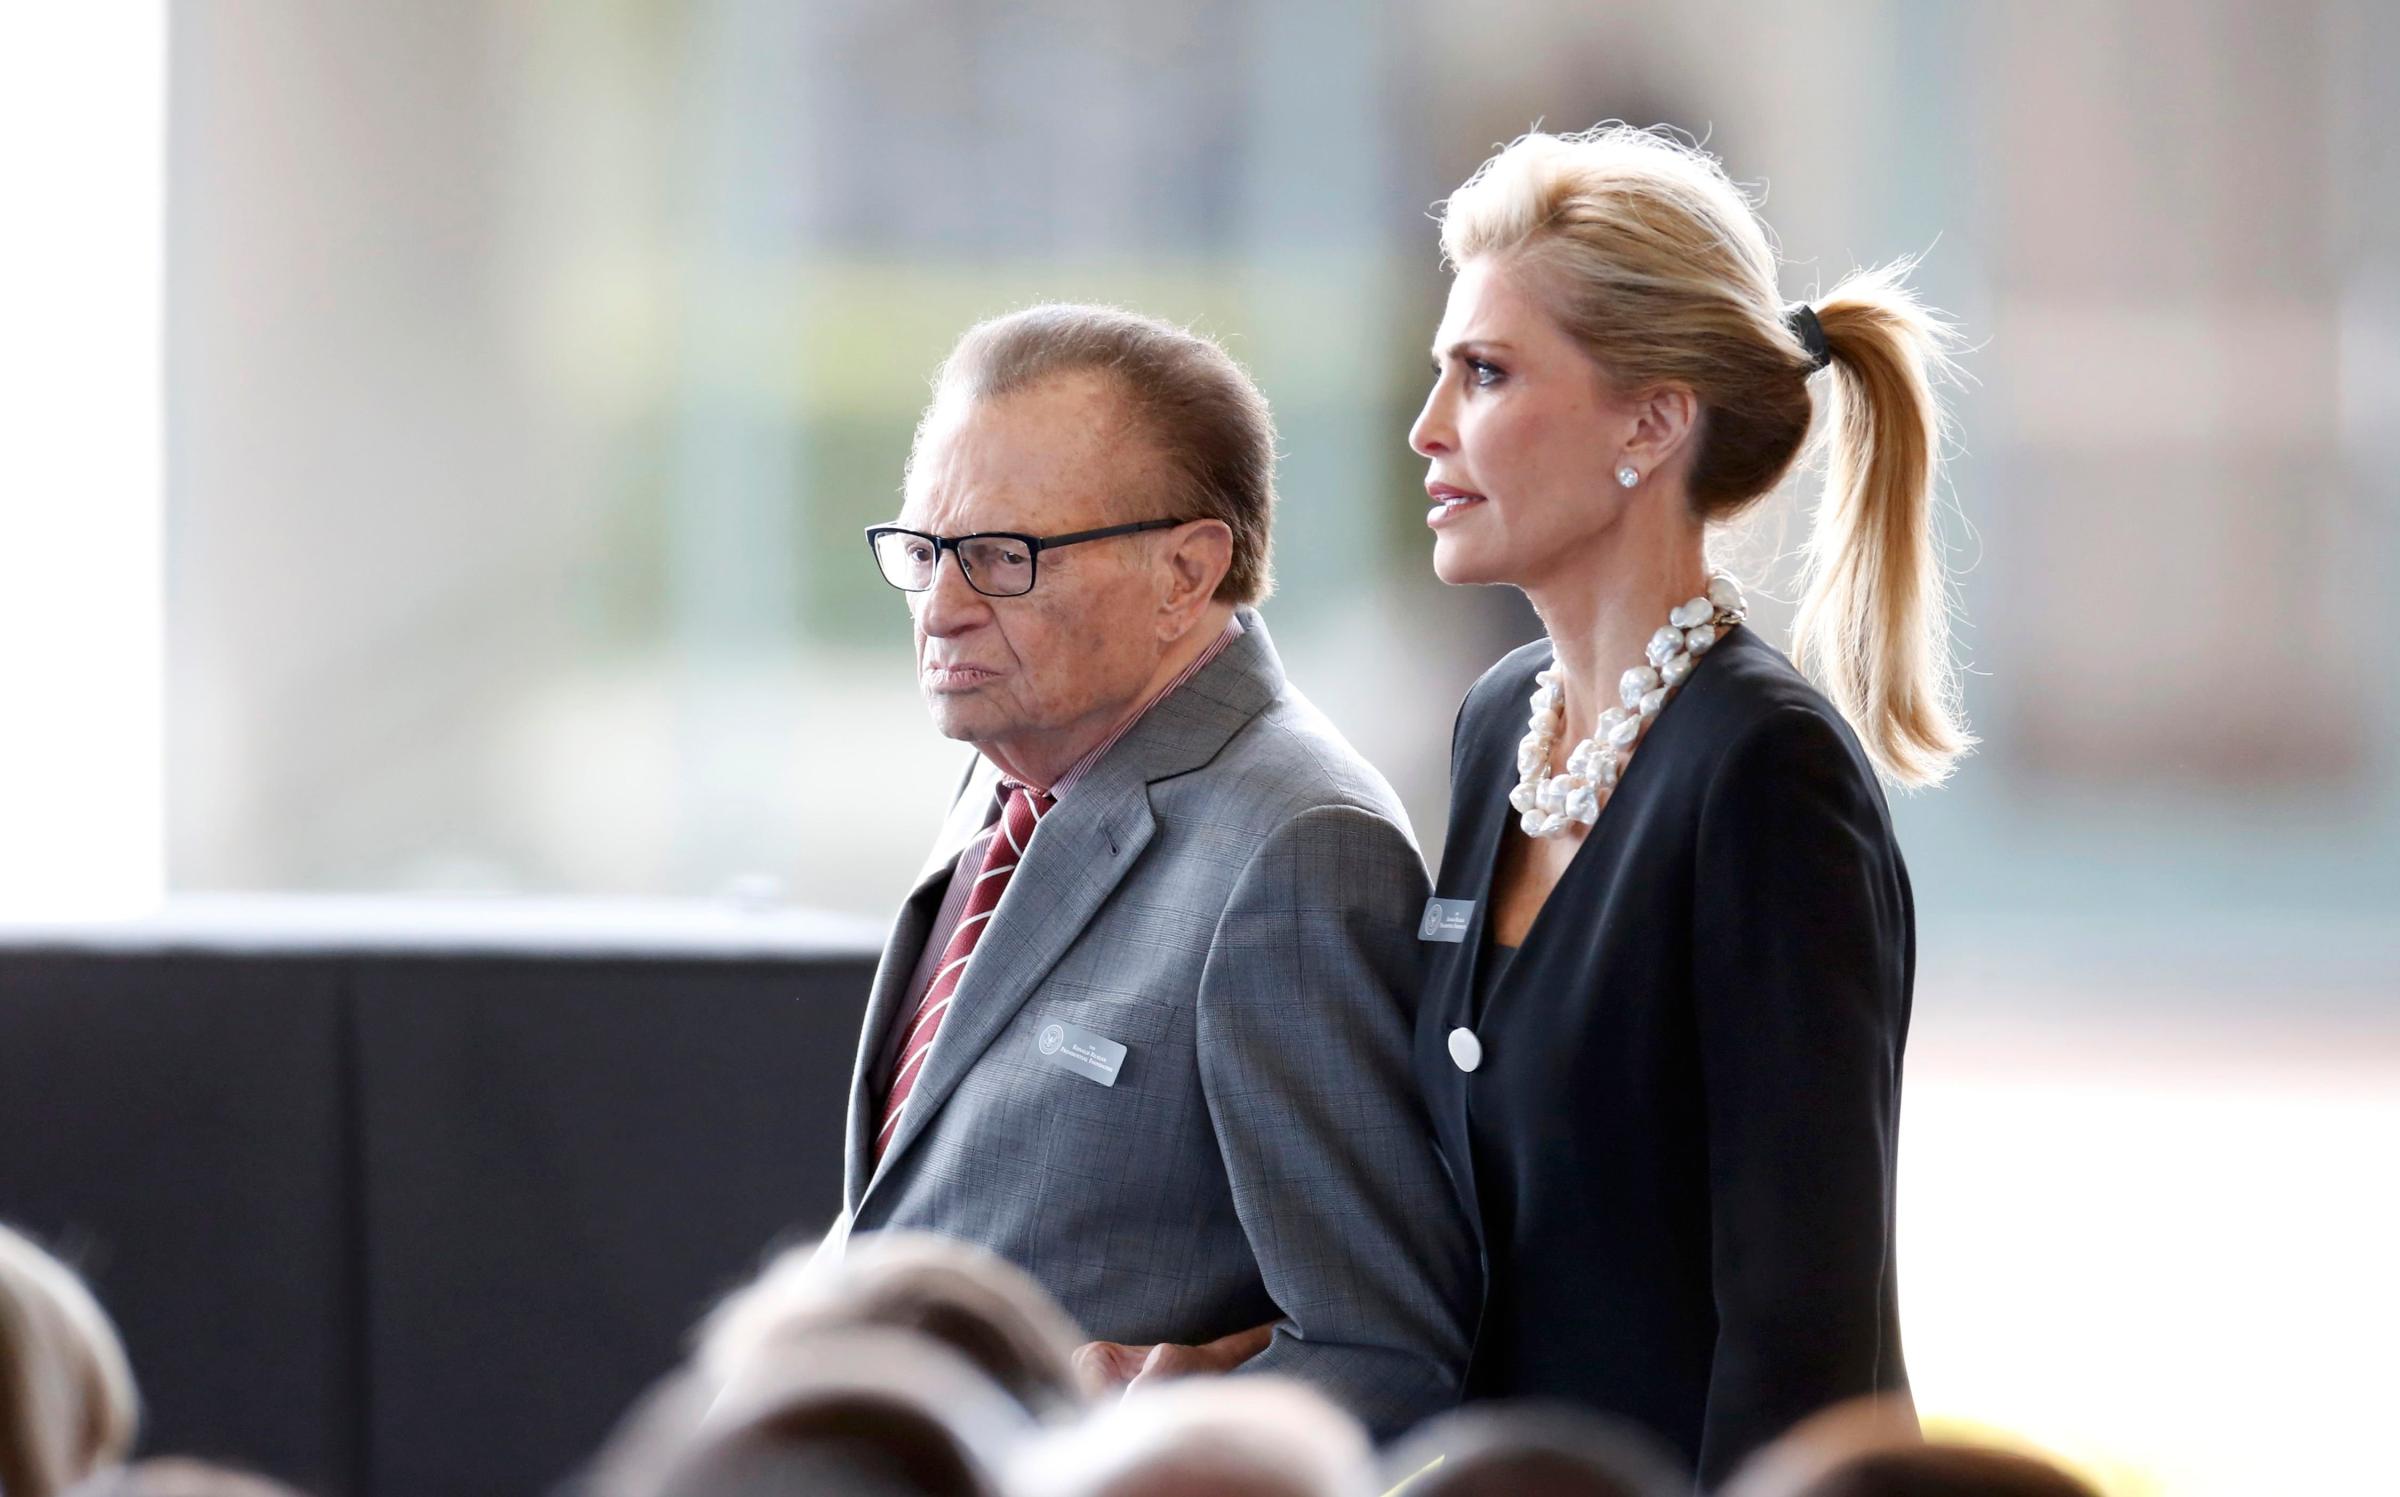 Television personality Larry King and his wife Shawn arrive for the funeral of Nancy Reagan at the Ronald Reagan Presidential Library in Simi Valley, California